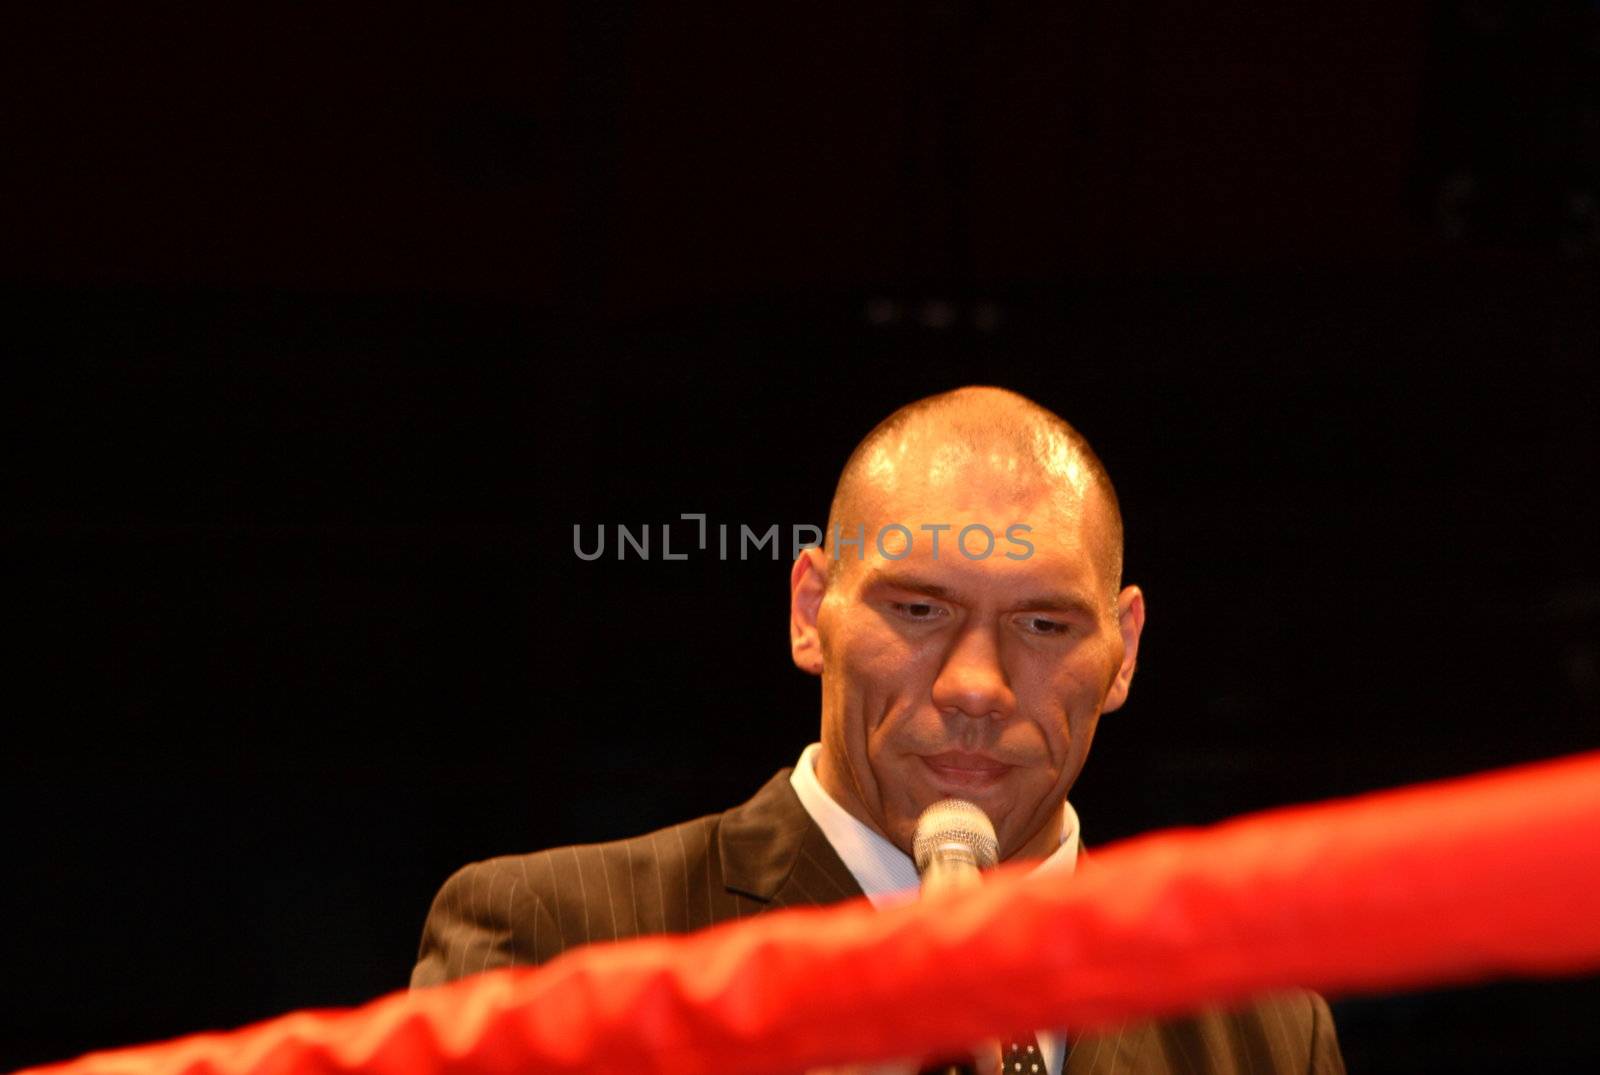 The World Champion on Boxing in Superheavy Weight Nikolay Valuev by Ledoct